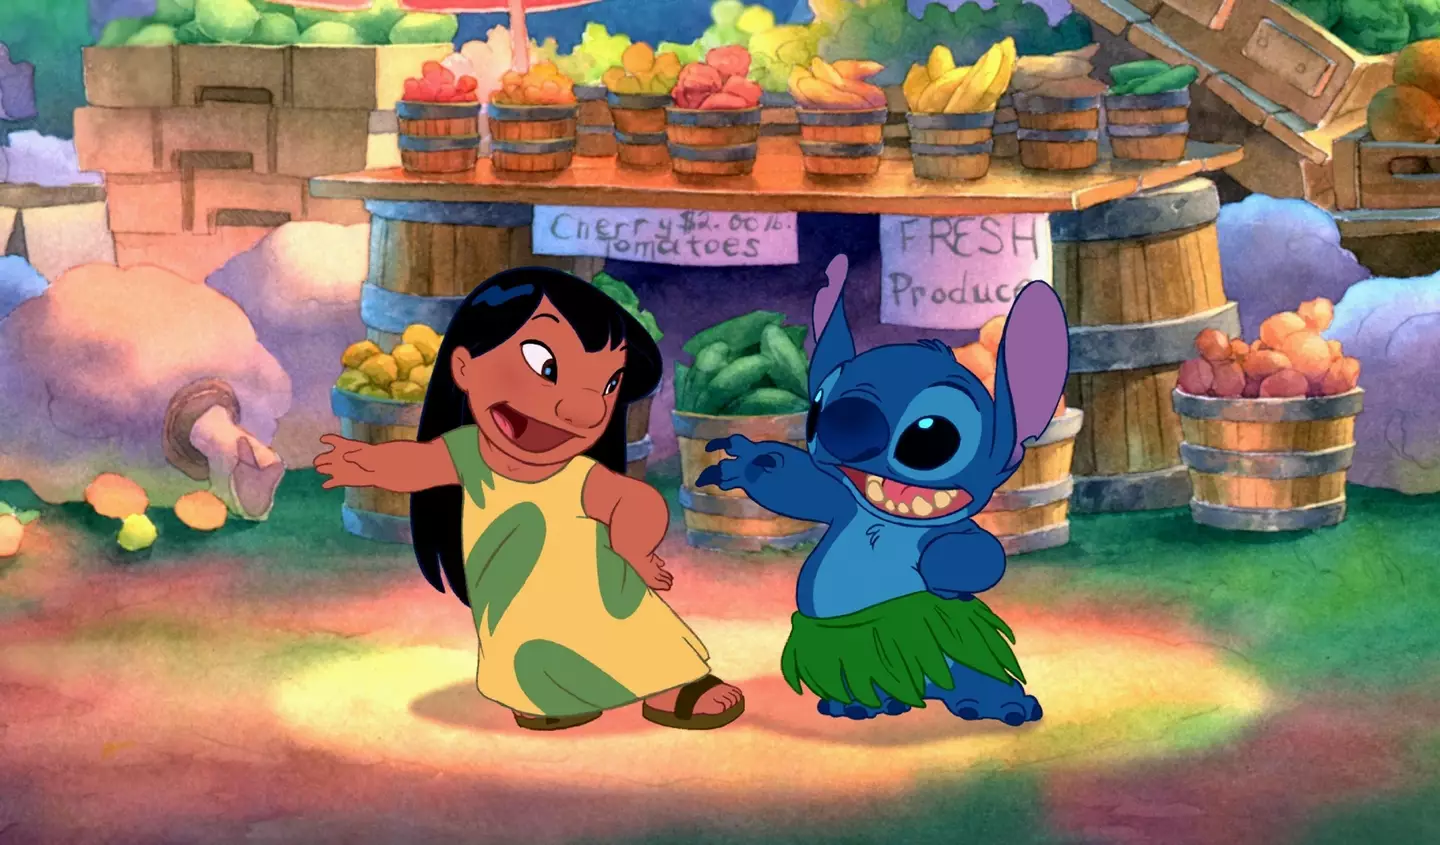 Lilo & Stitch turned 20 this month.